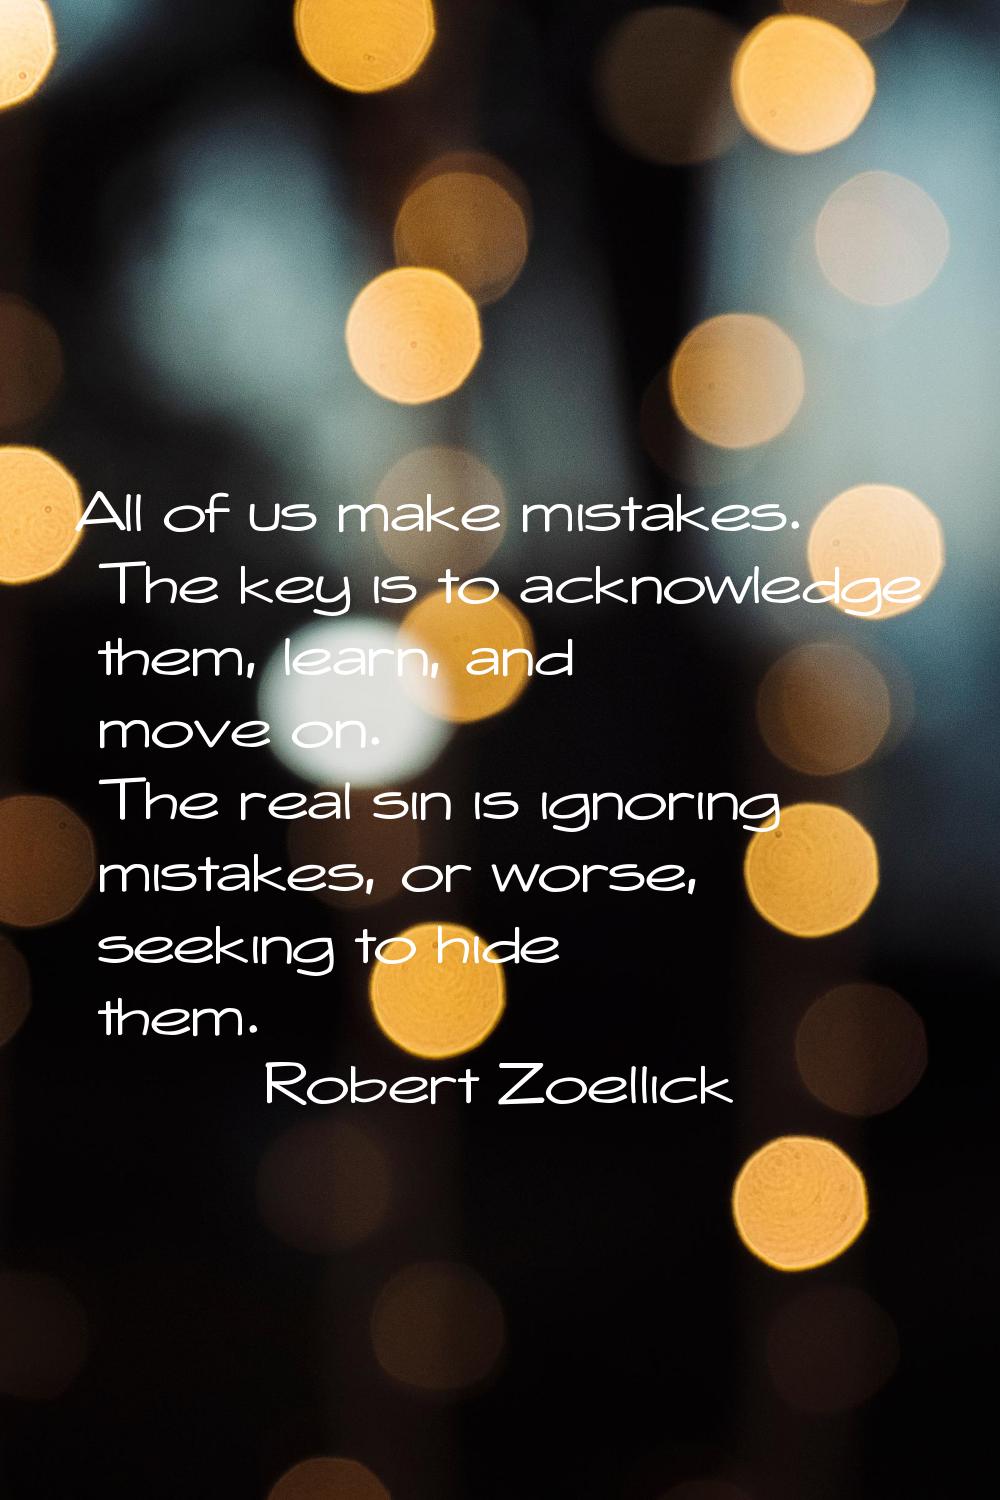 All of us make mistakes. The key is to acknowledge them, learn, and move on. The real sin is ignori